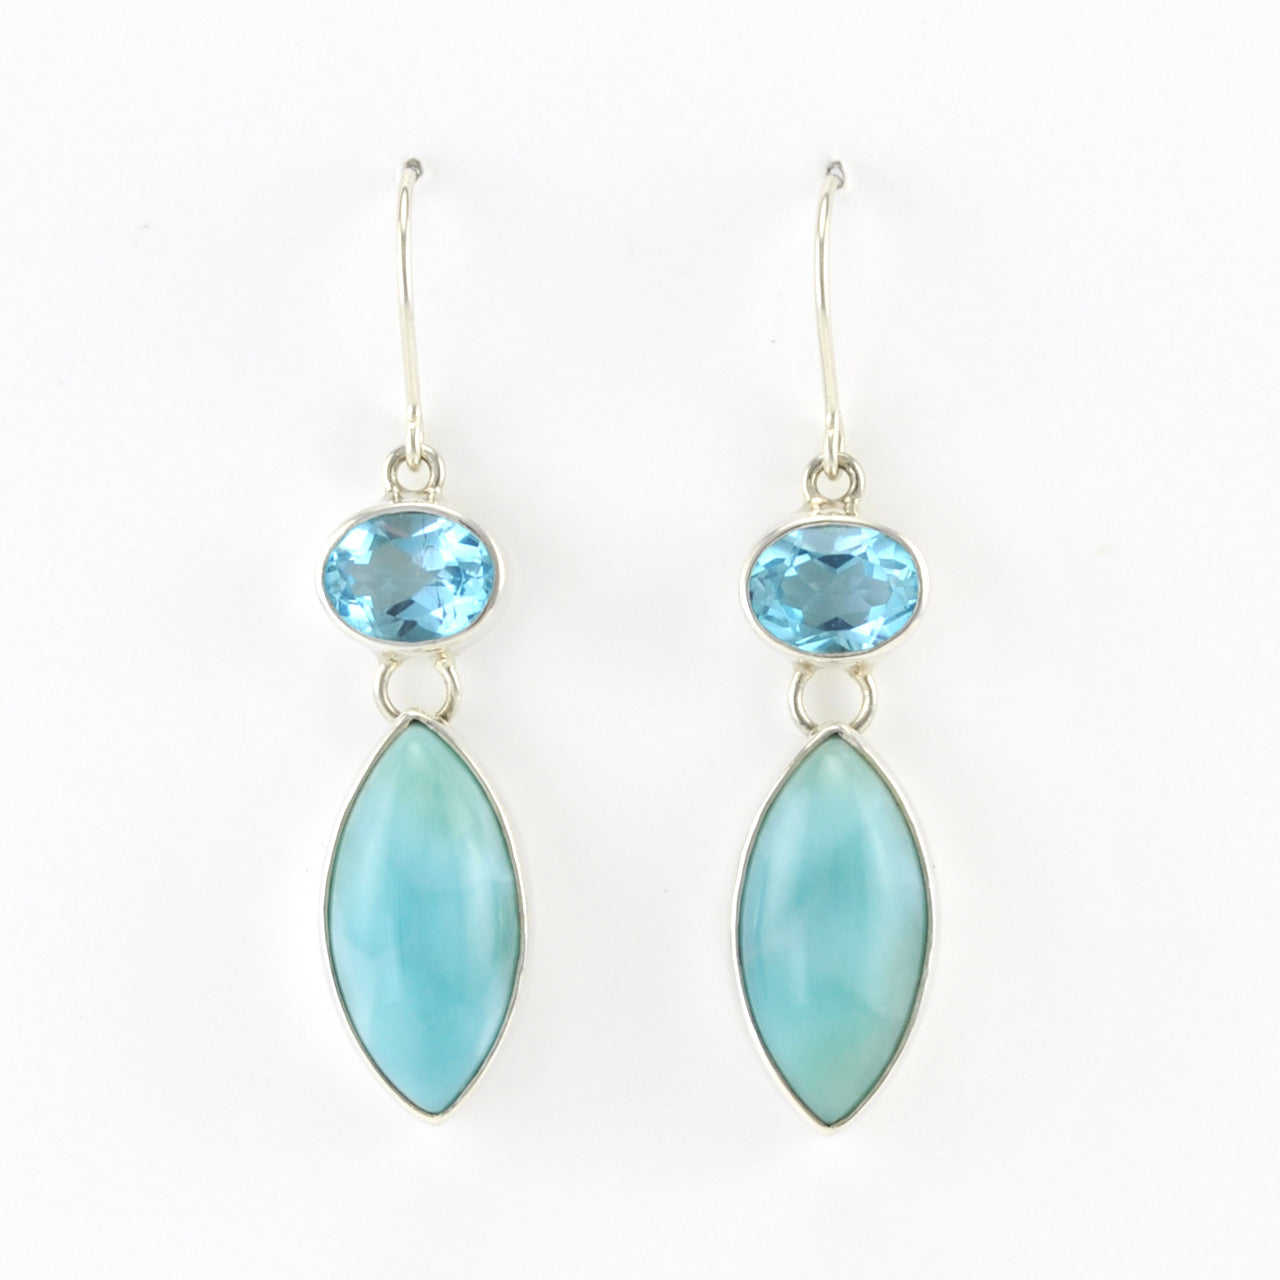 Alt View Silver Blue Topaz Oval Larimar Marquise Earrings